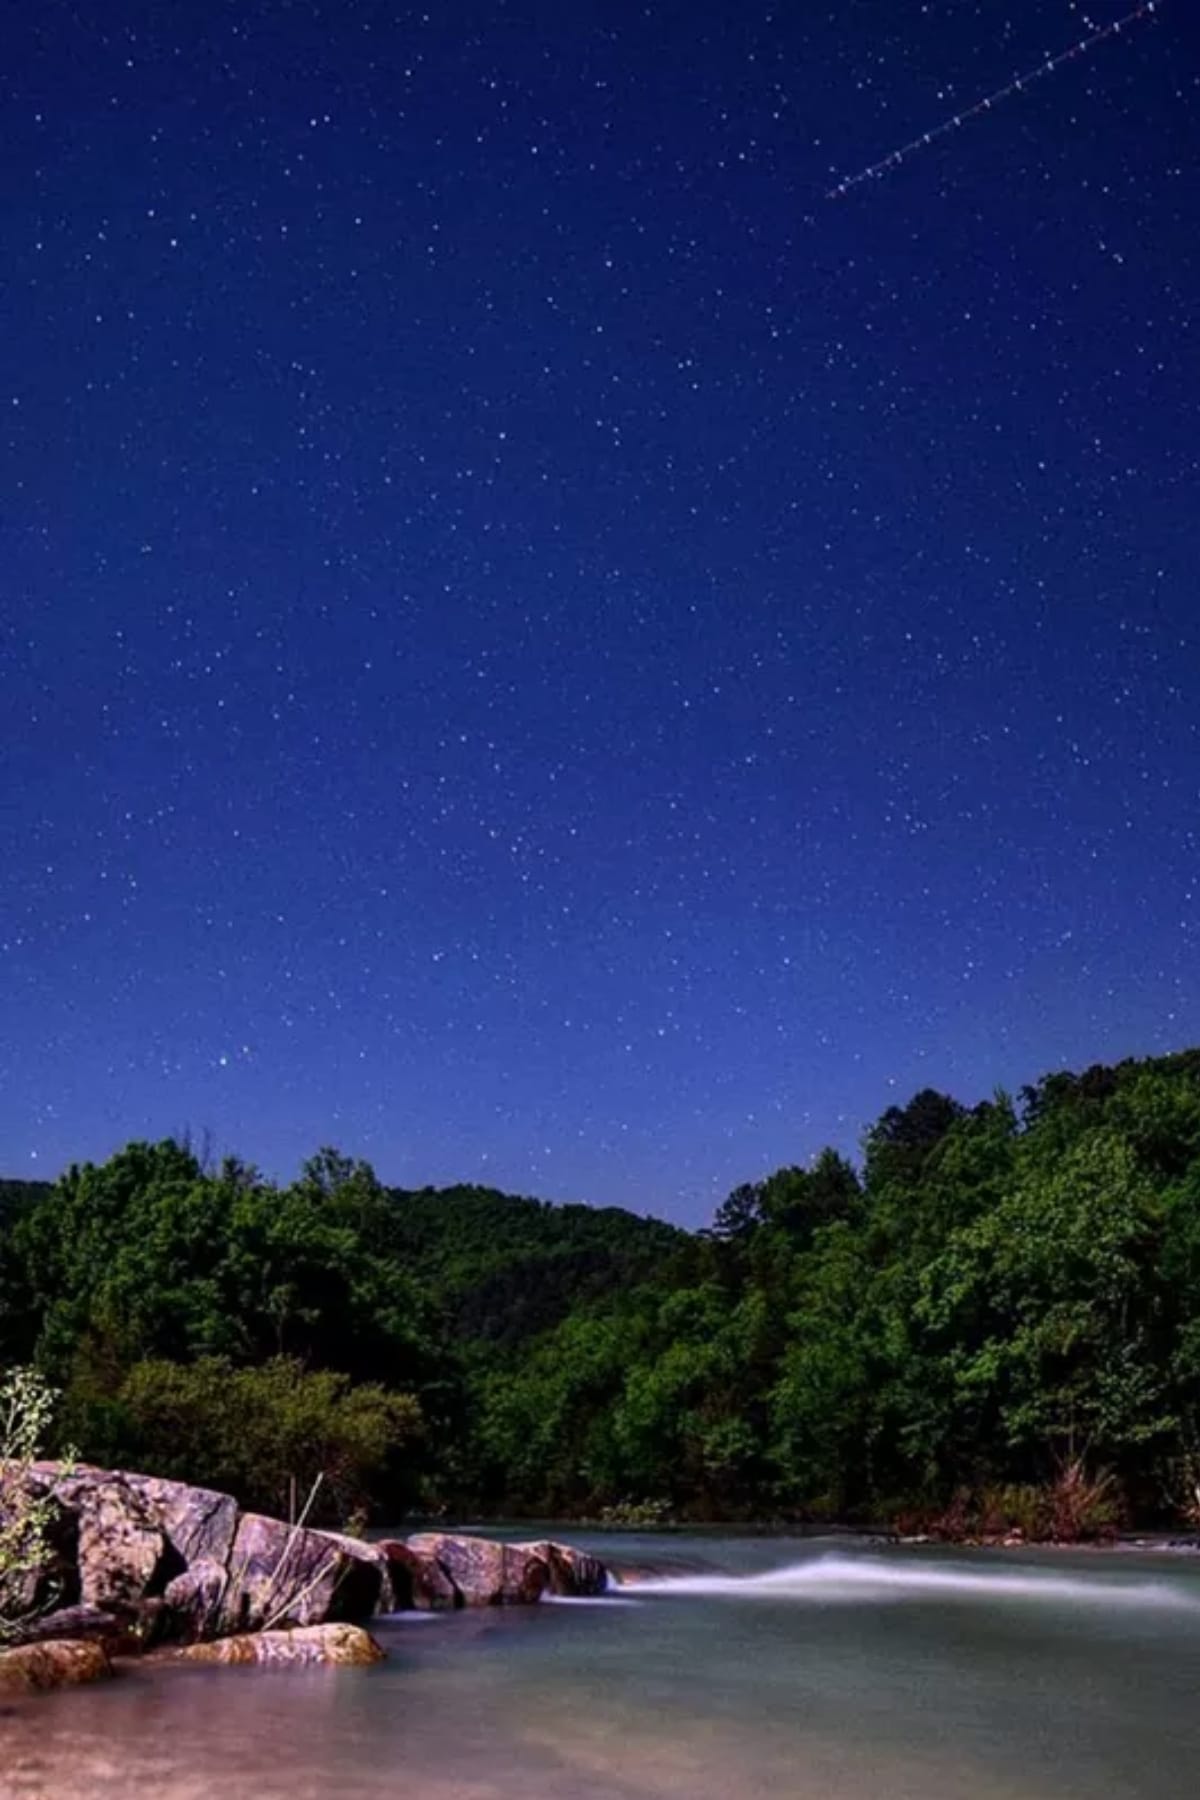 Starry skies over the Buffalo National River.